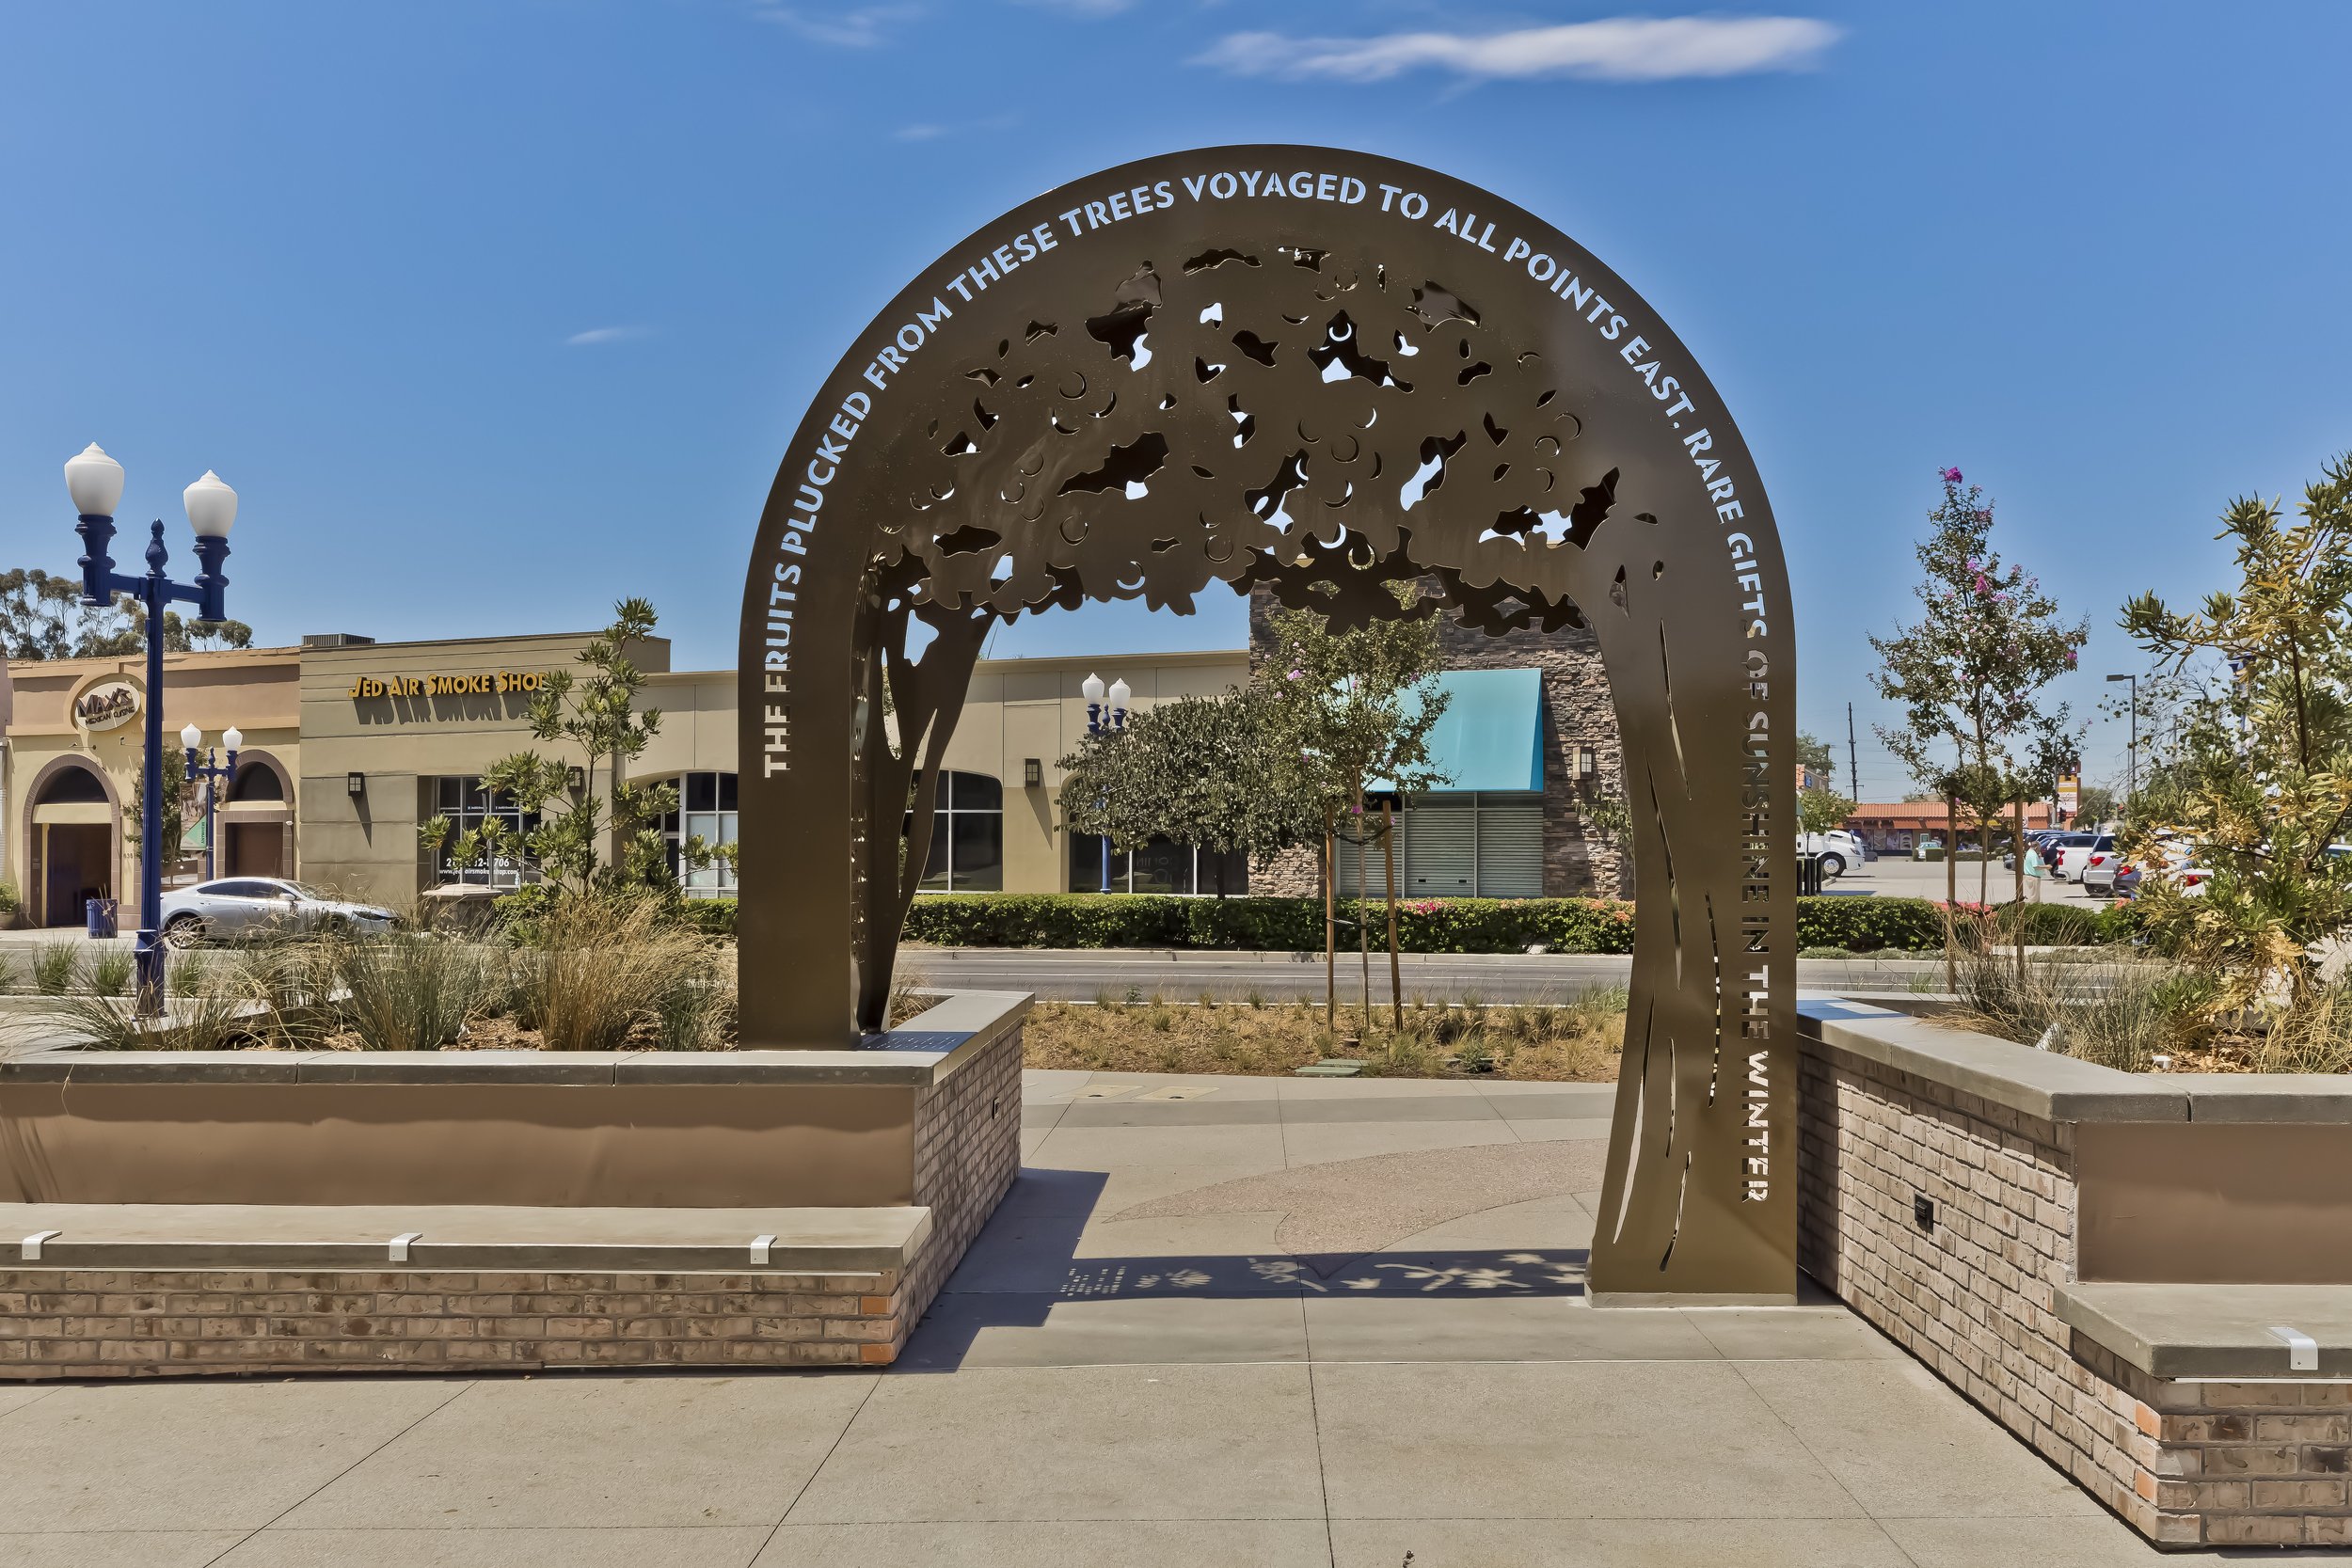  The Stone, the River, the Door  Public art commission for mixed-use development in downtown Azusa  An arched doorway acting as a passage through time, a portal. Drawing inspiration from the history of the area and the name of the development “The Or